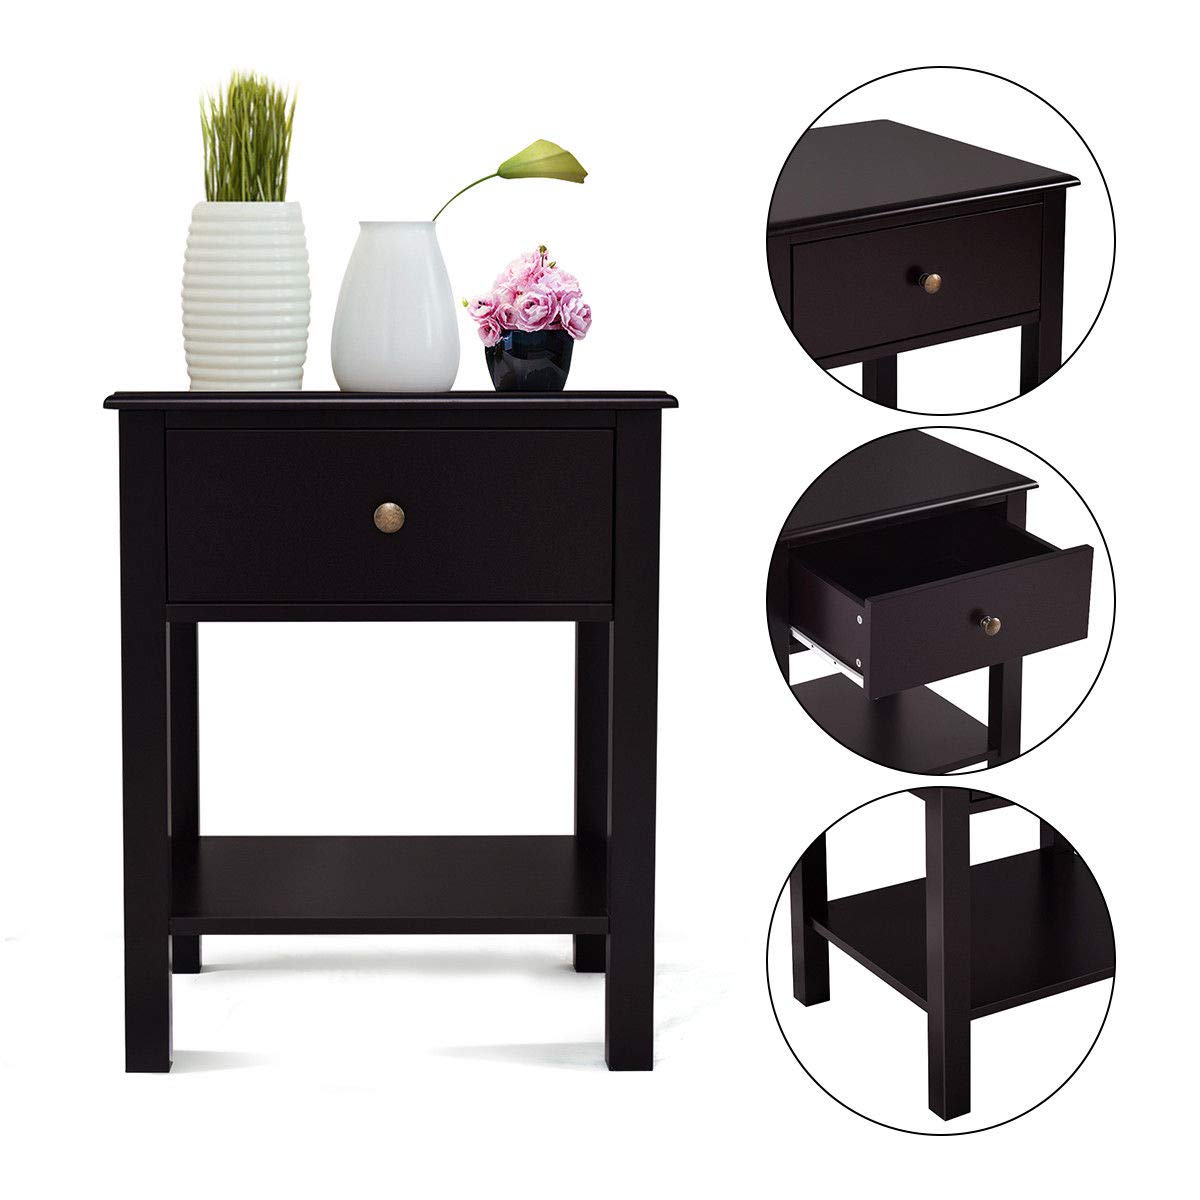 Giantex Nightstand W/Drawer and Shelf, Stable Frame Storage Cabinet